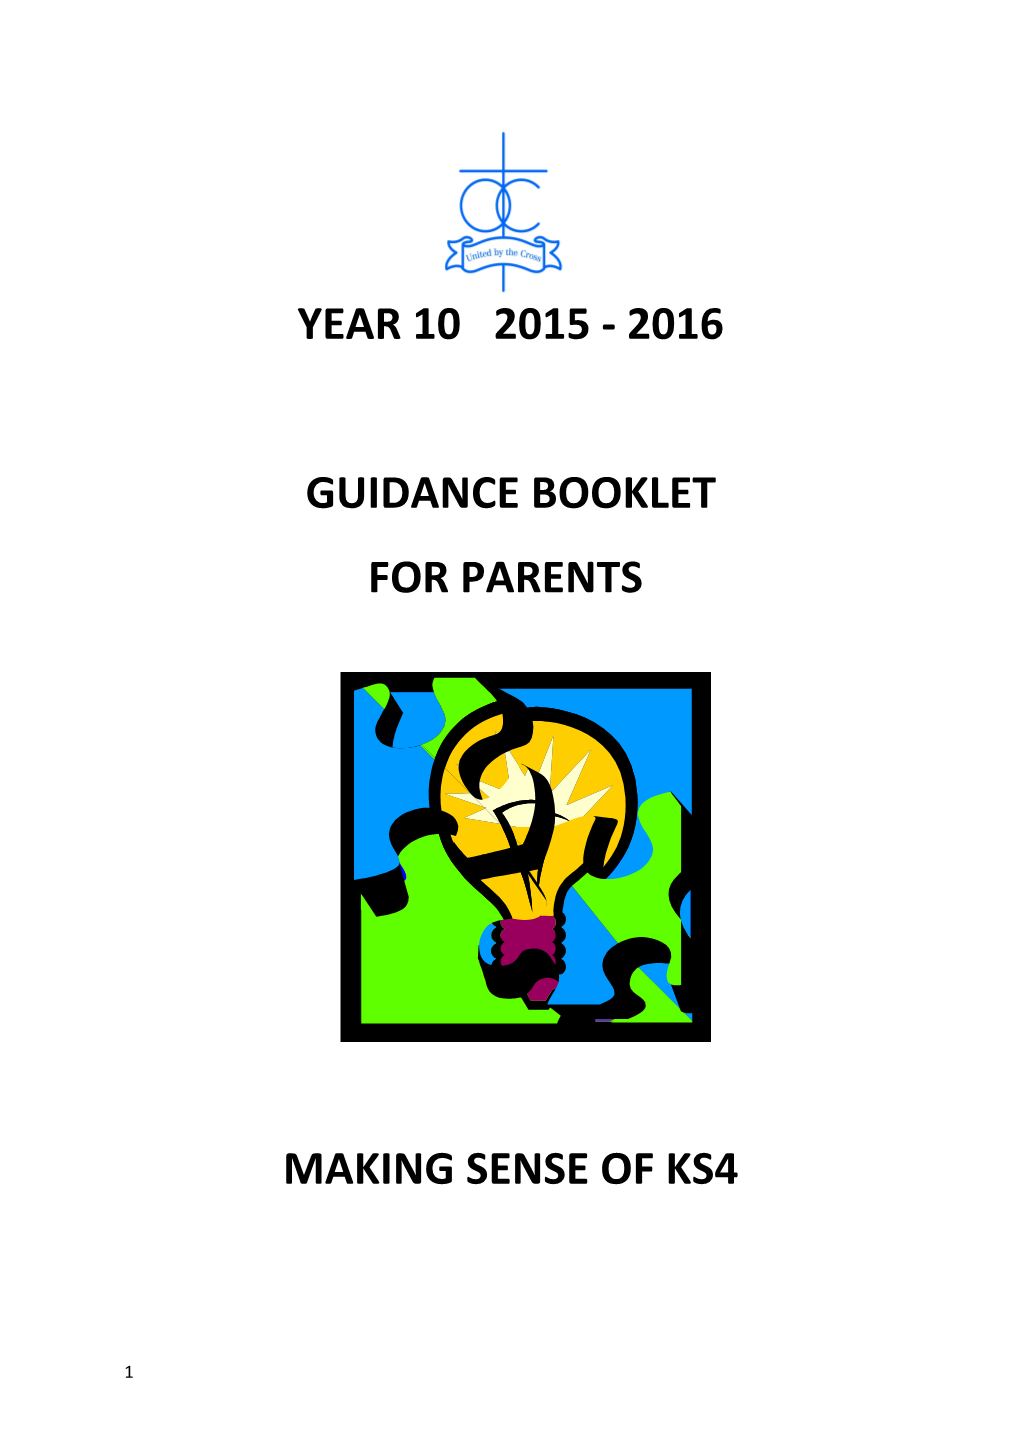 Guidance Booklet